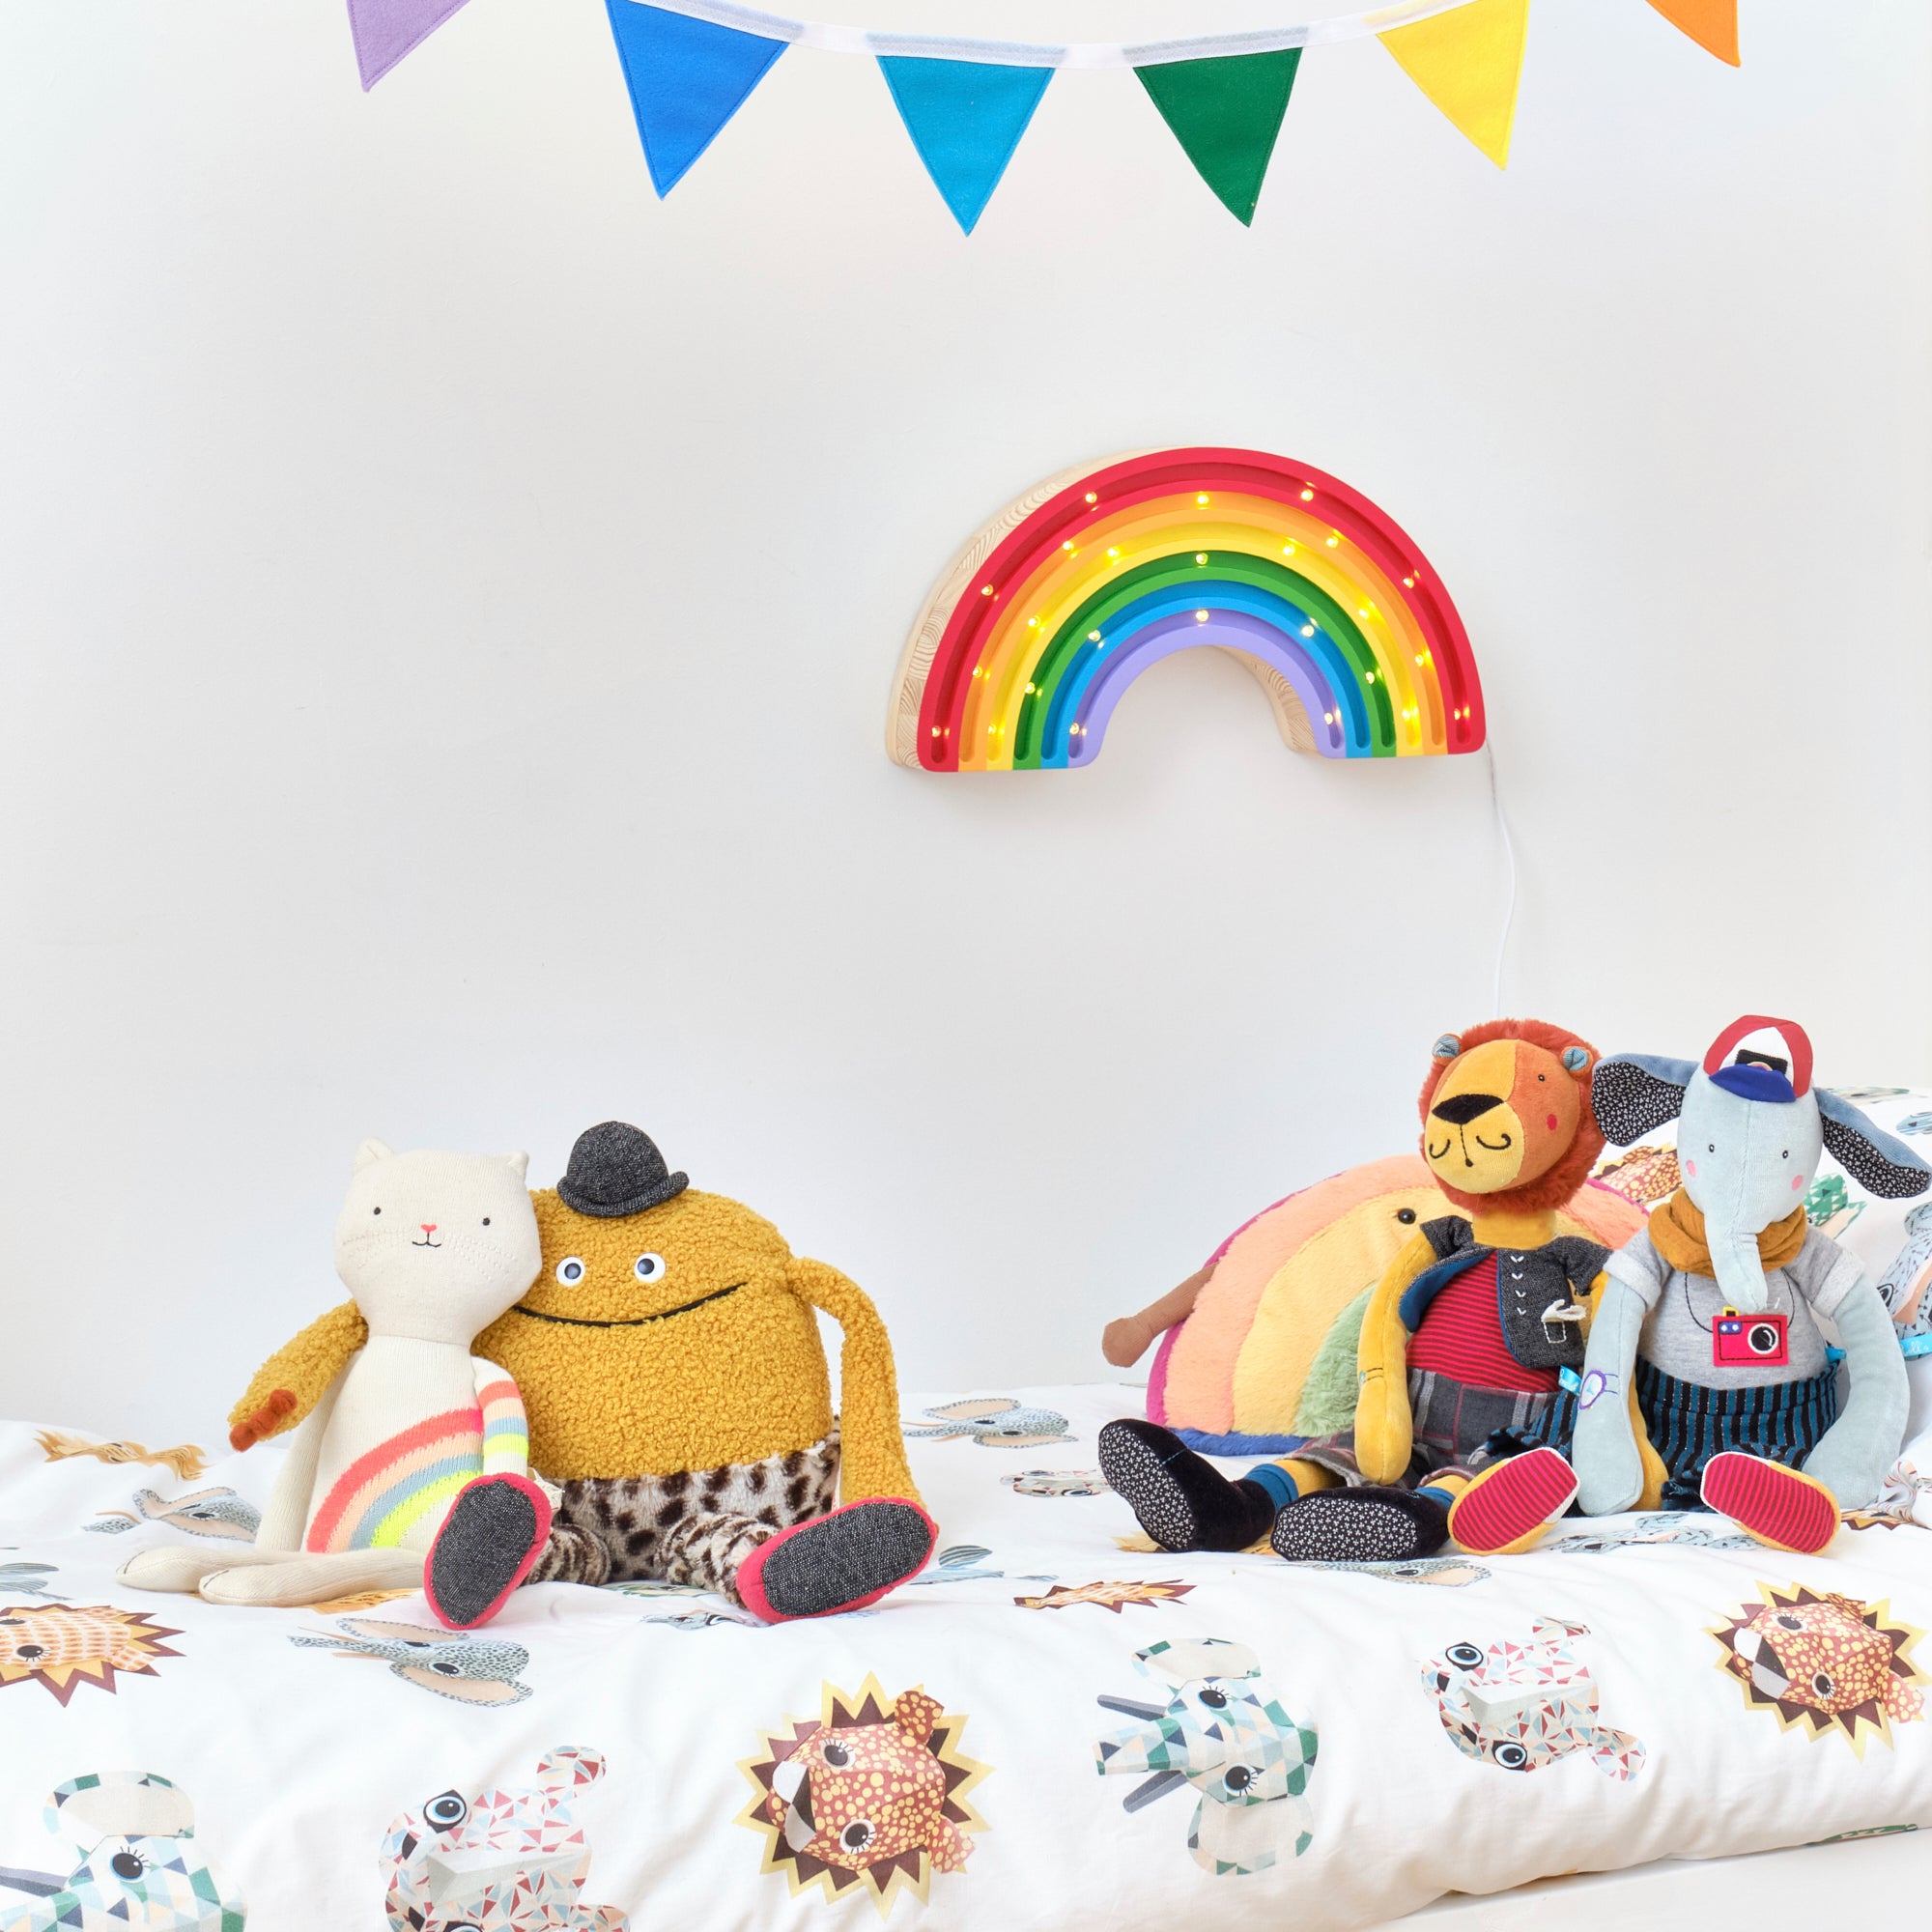 Rainbow Lamp by Little Lights, available at Bobby Rabbit.